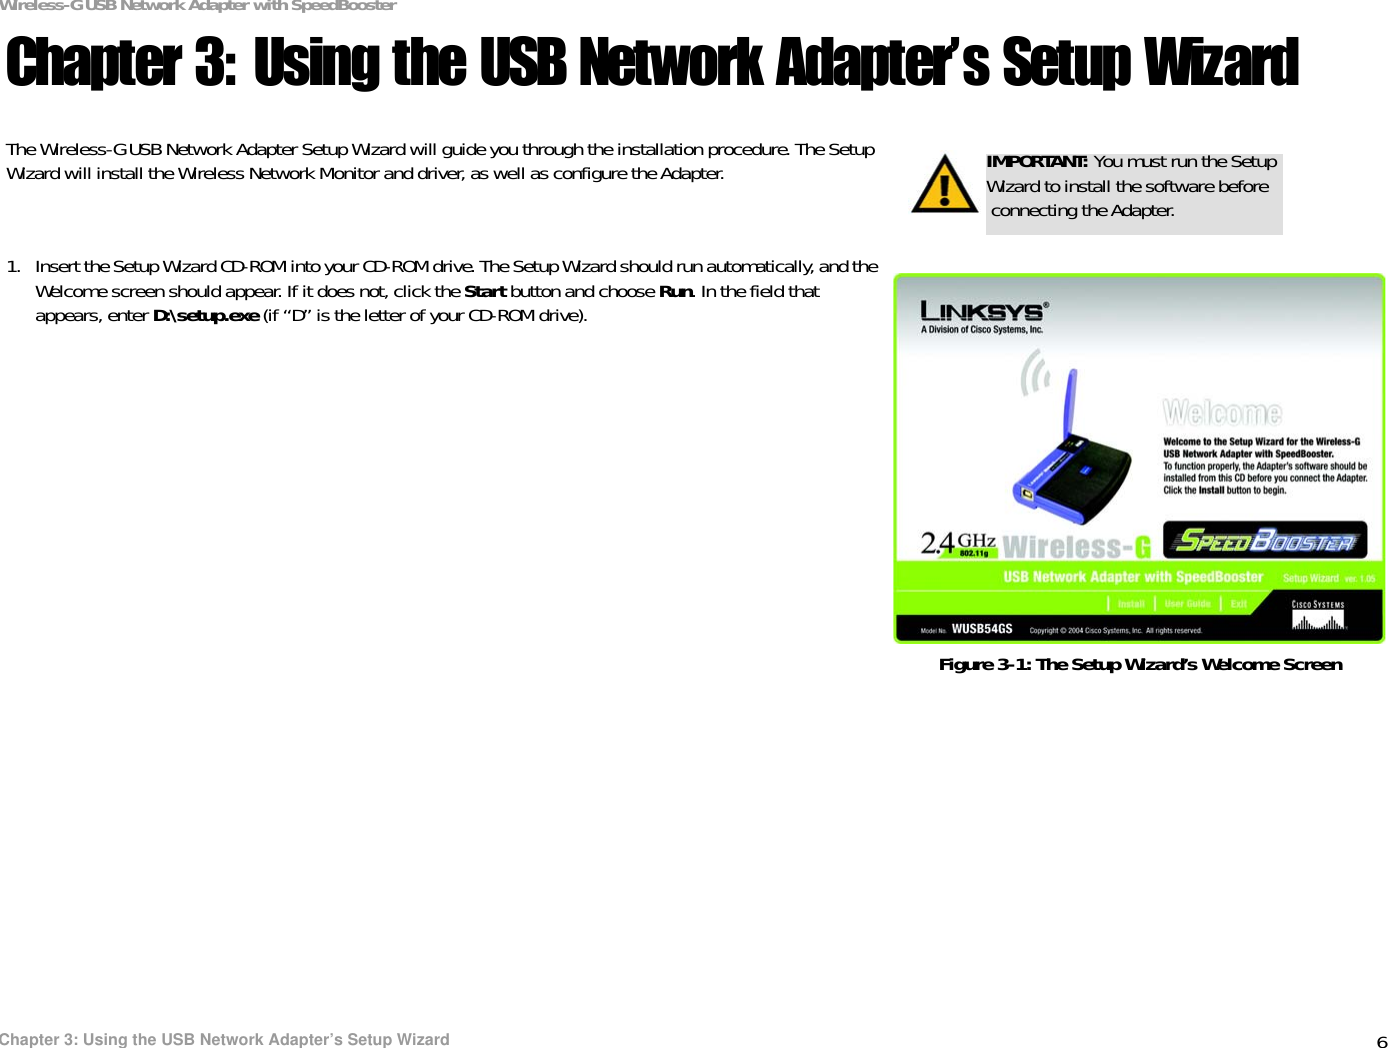 6Chapter 3: Using the USB Network Adapter’s Setup WizardWireless-G USB Network Adapter with SpeedBoosterChapter 3: Using the USB Network Adapter’s Setup WizardThe Wireless-G USB Network Adapter Setup Wizard will guide you through the installation procedure. The Setup Wizard will install the Wireless Network Monitor and driver, as well as configure the Adapter.1. Insert the Setup Wizard CD-ROM into your CD-ROM drive. The Setup Wizard should run automatically, and the Welcome screen should appear. If it does not, click the Start button and choose Run. In the field that appears, enter D:\setup.exe (if “D” is the letter of your CD-ROM drive).IMPORTANT: You must run the Setup Wizard to install the software before connecting the Adapter.Figure 3-1: The Setup Wizard’s Welcome Screen